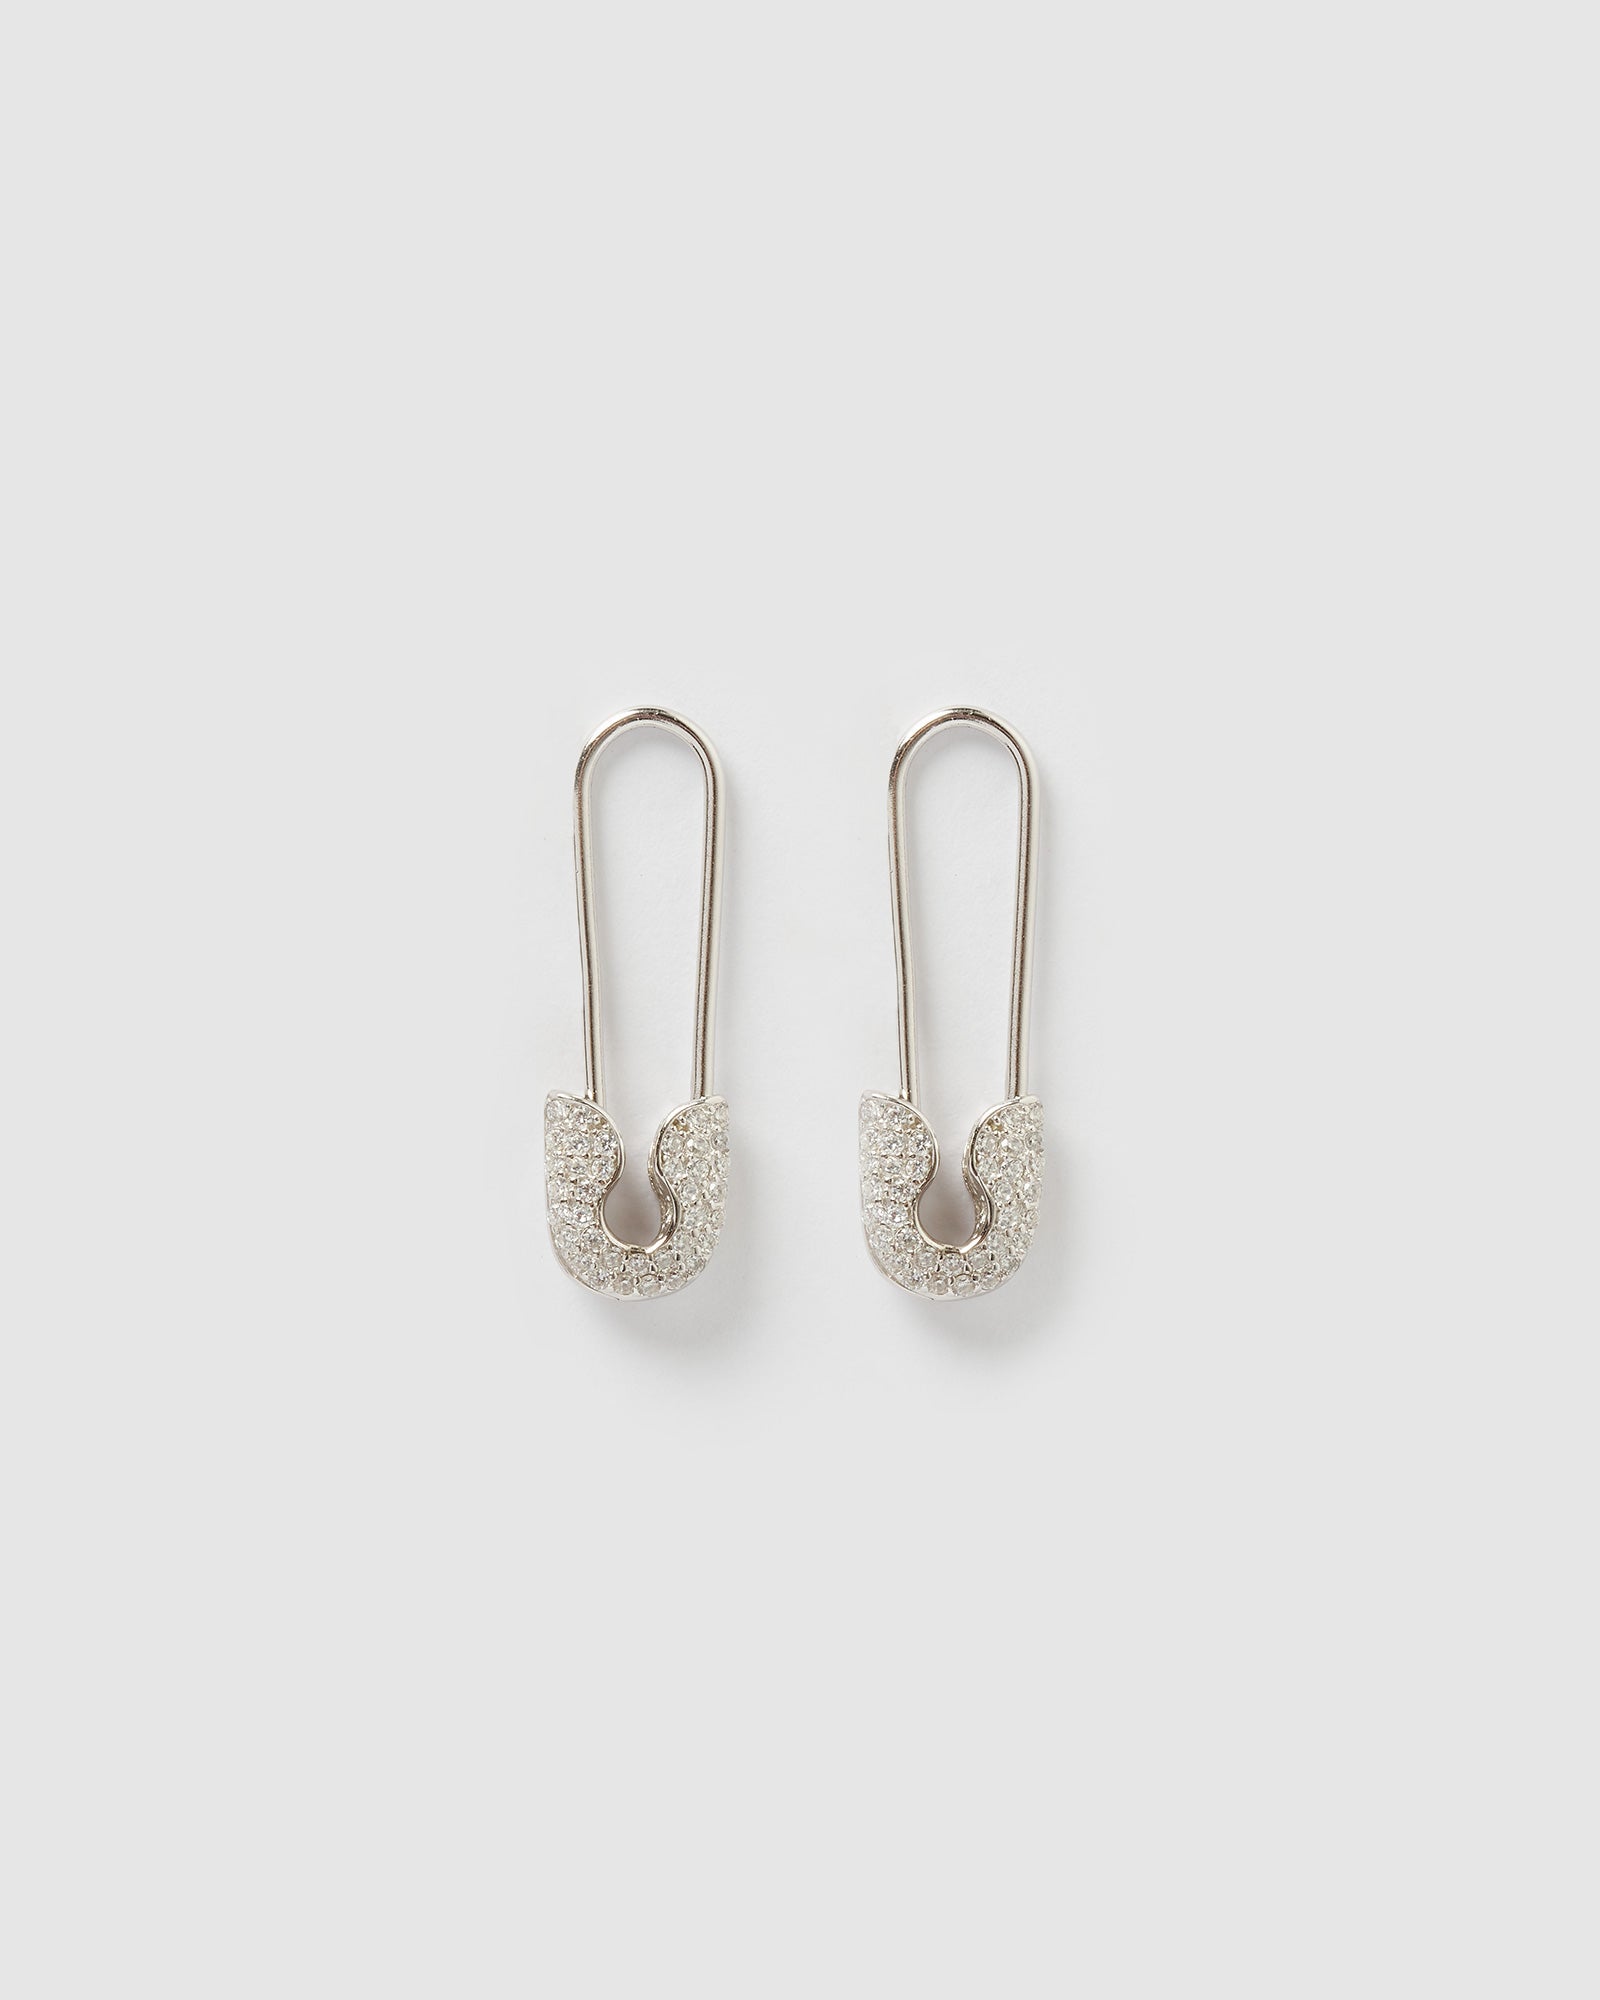 Safety Pin Spike Earring | RARE-ROMANCE™ | Safety pin earrings, Spike  earrings, Safety pin